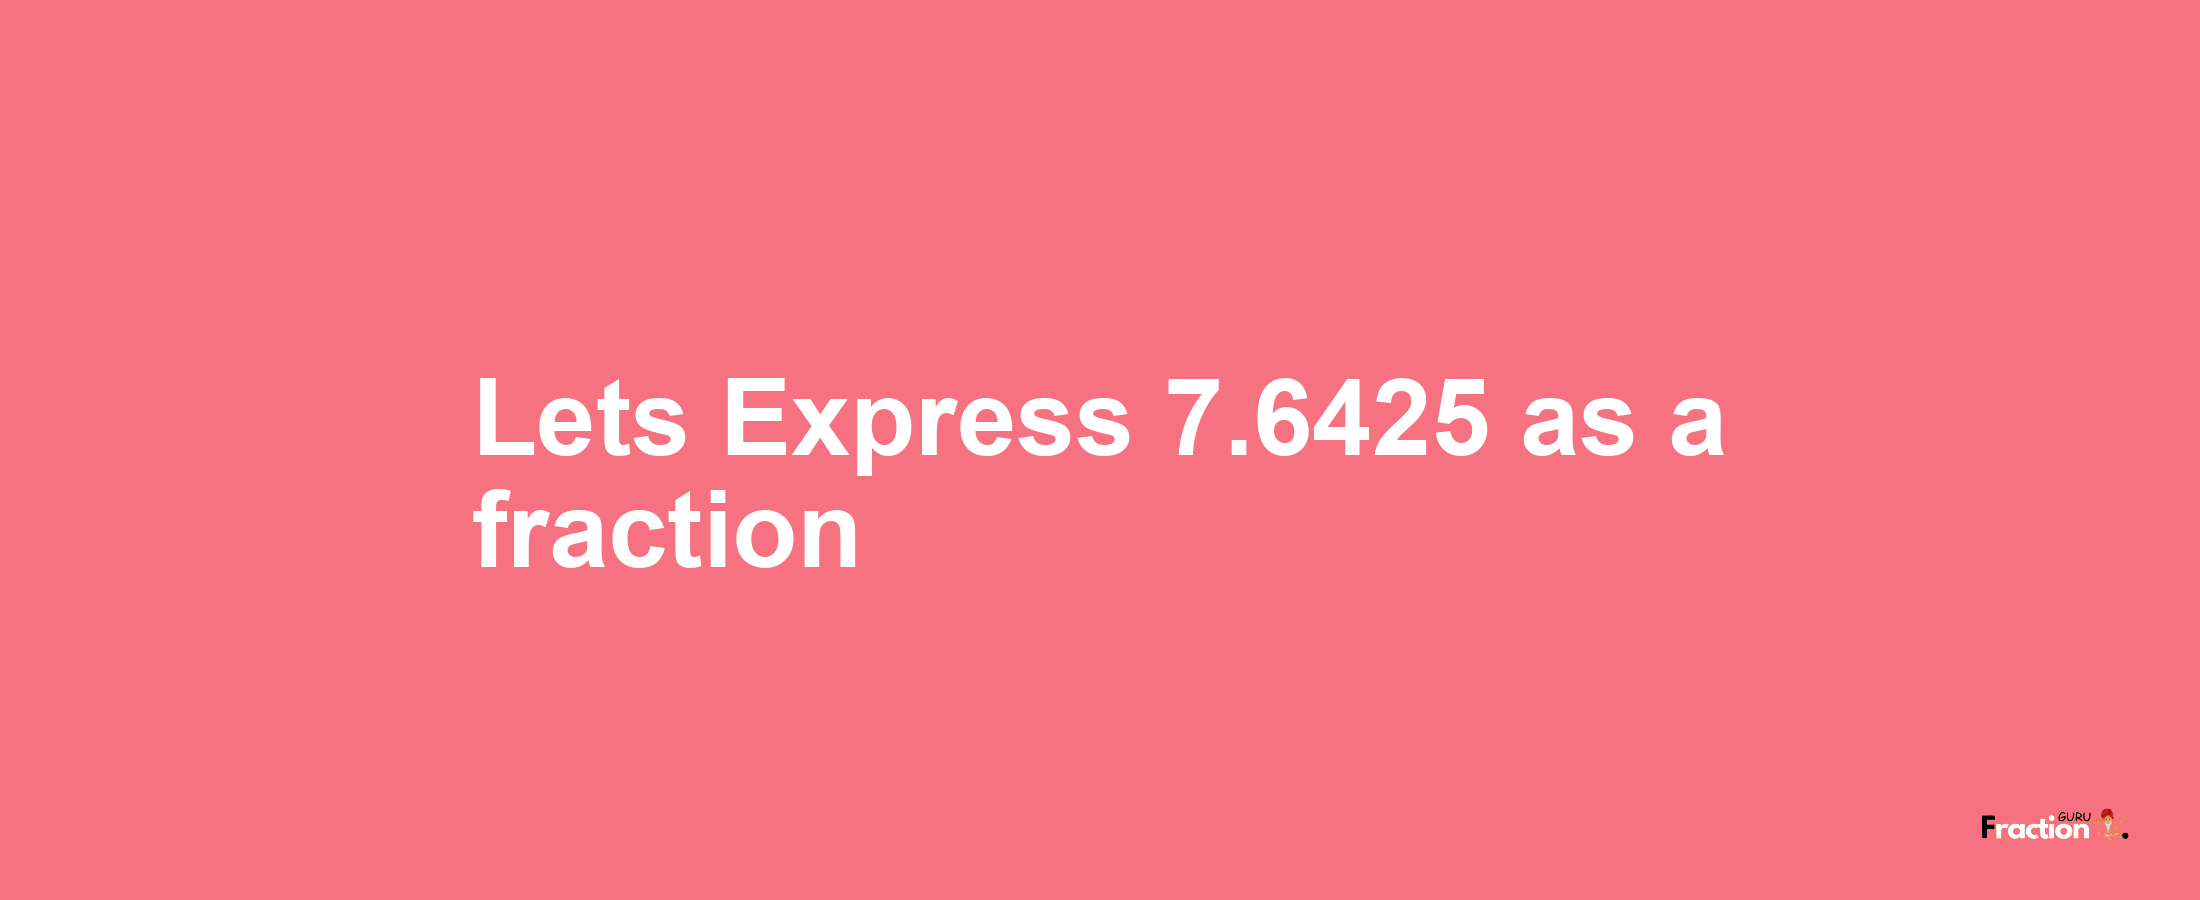 Lets Express 7.6425 as afraction